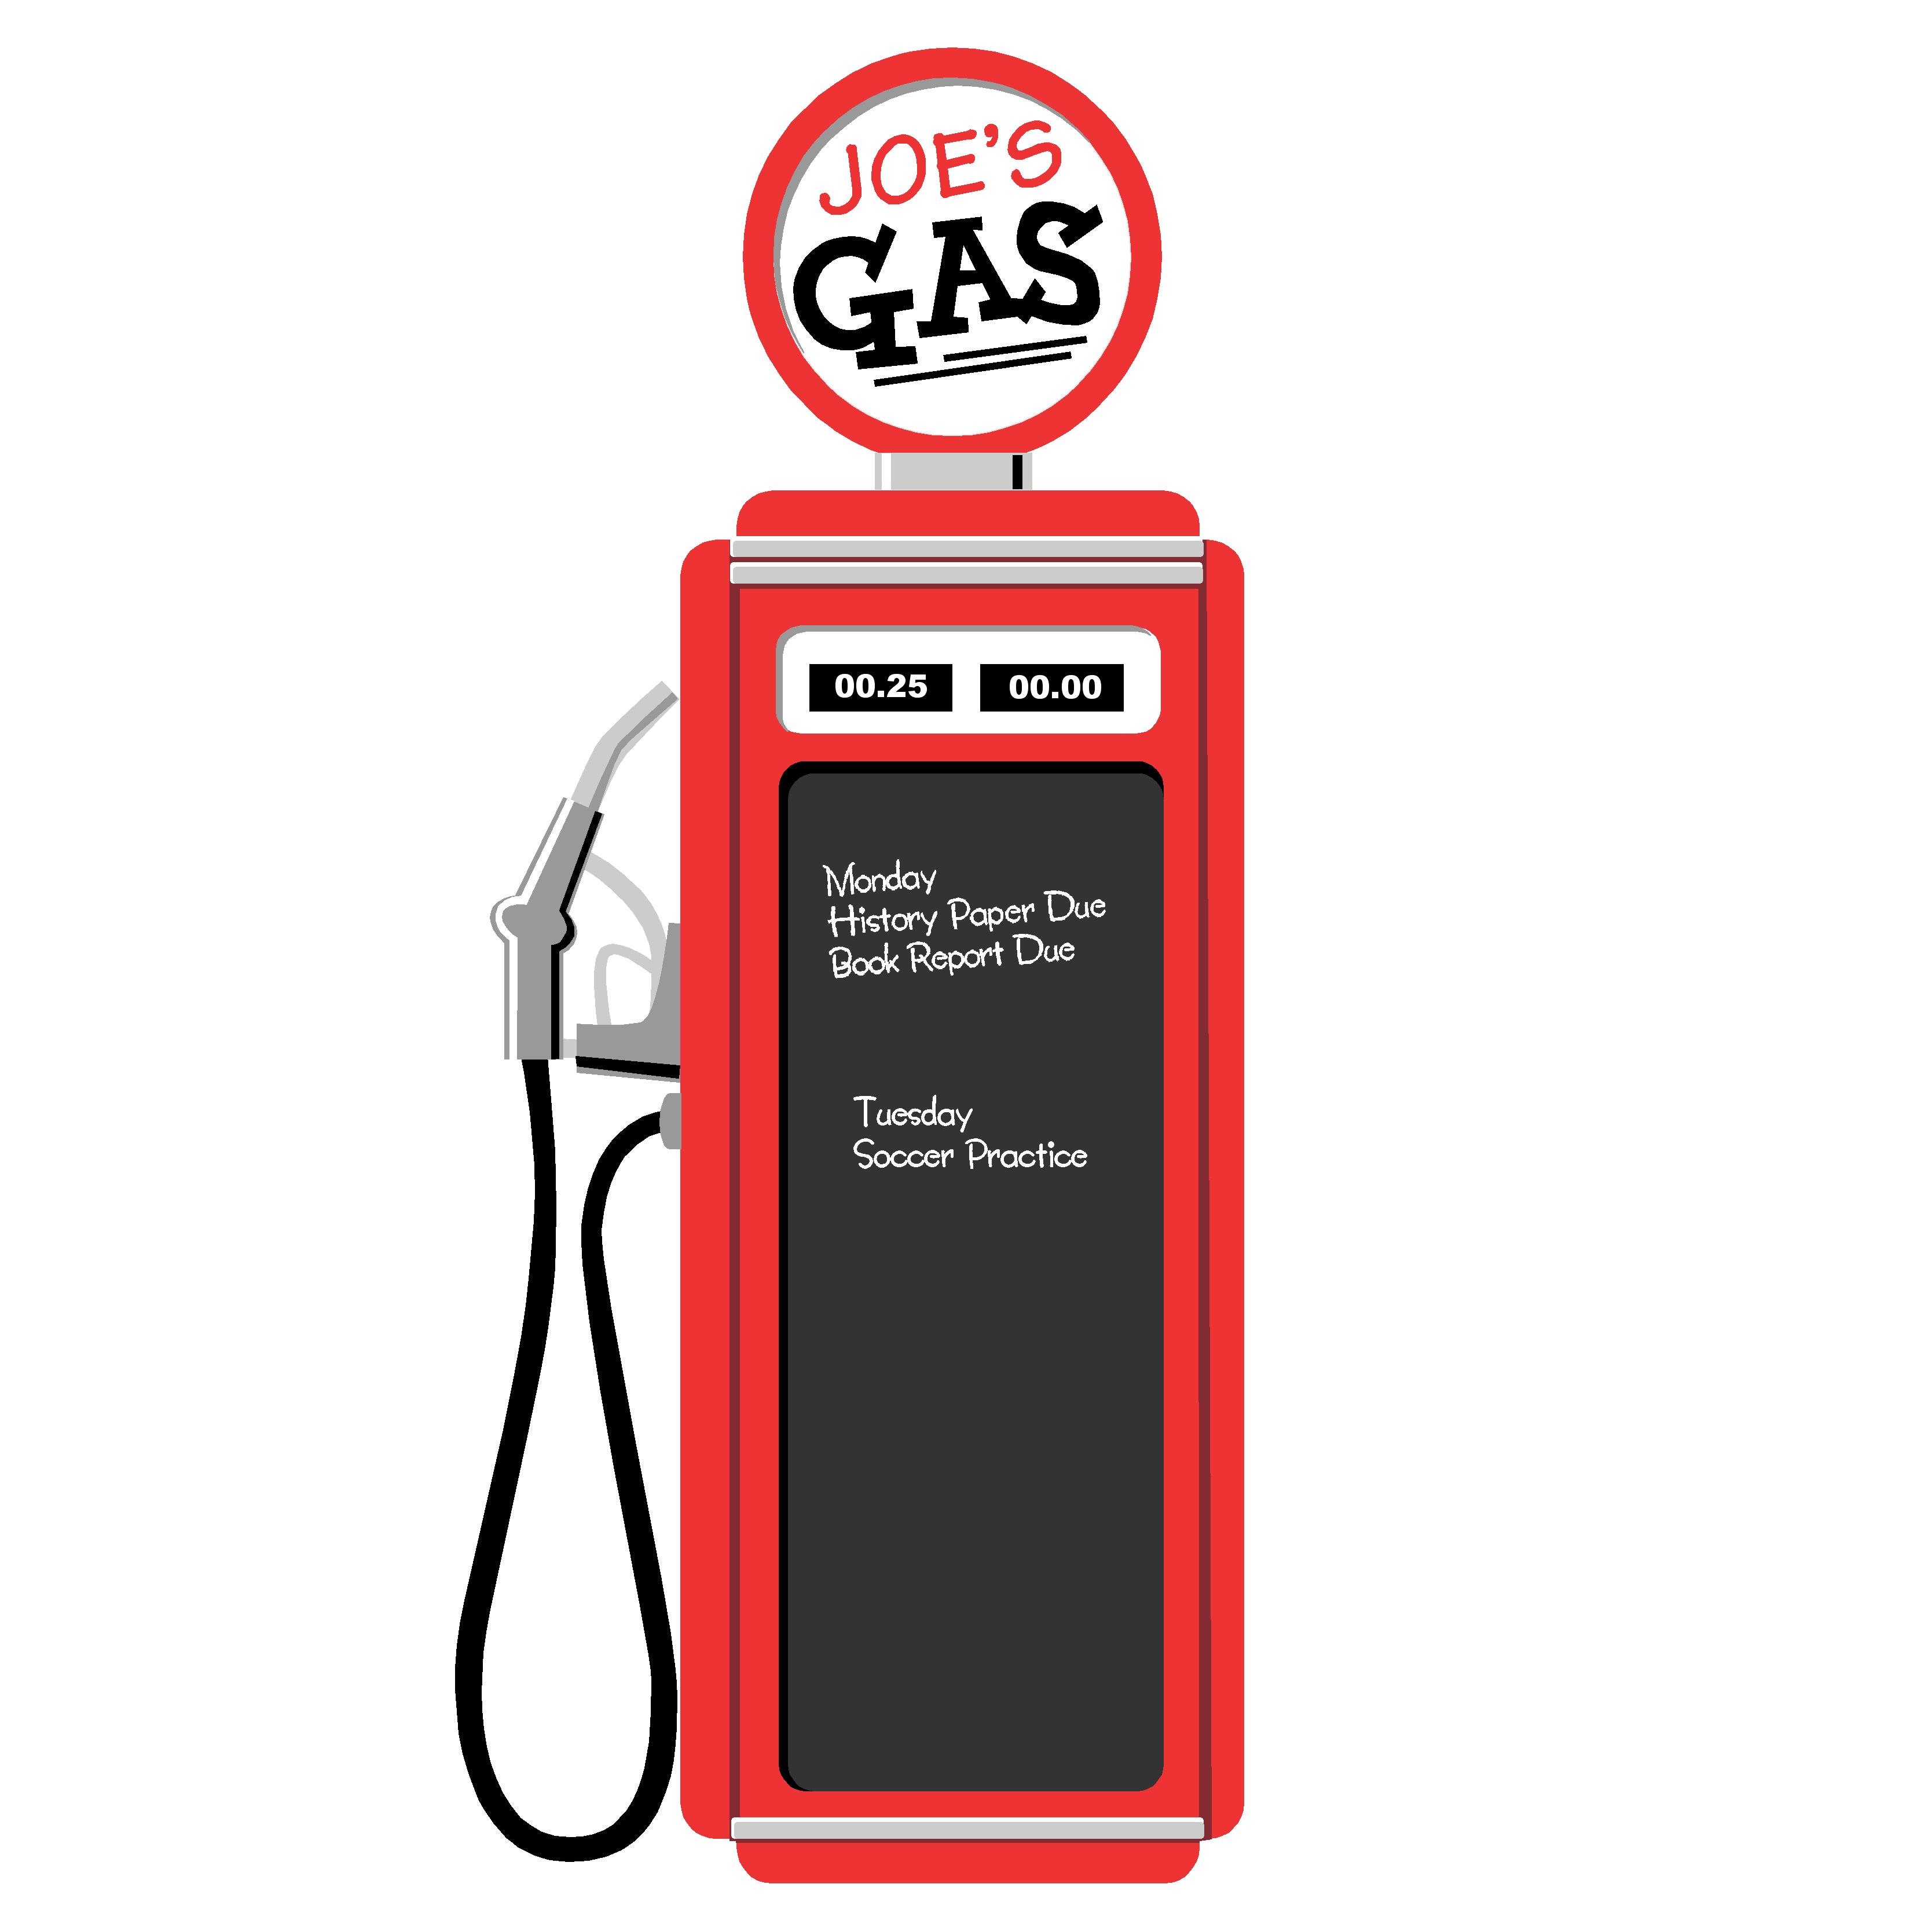 Gas Station Clipart Black And